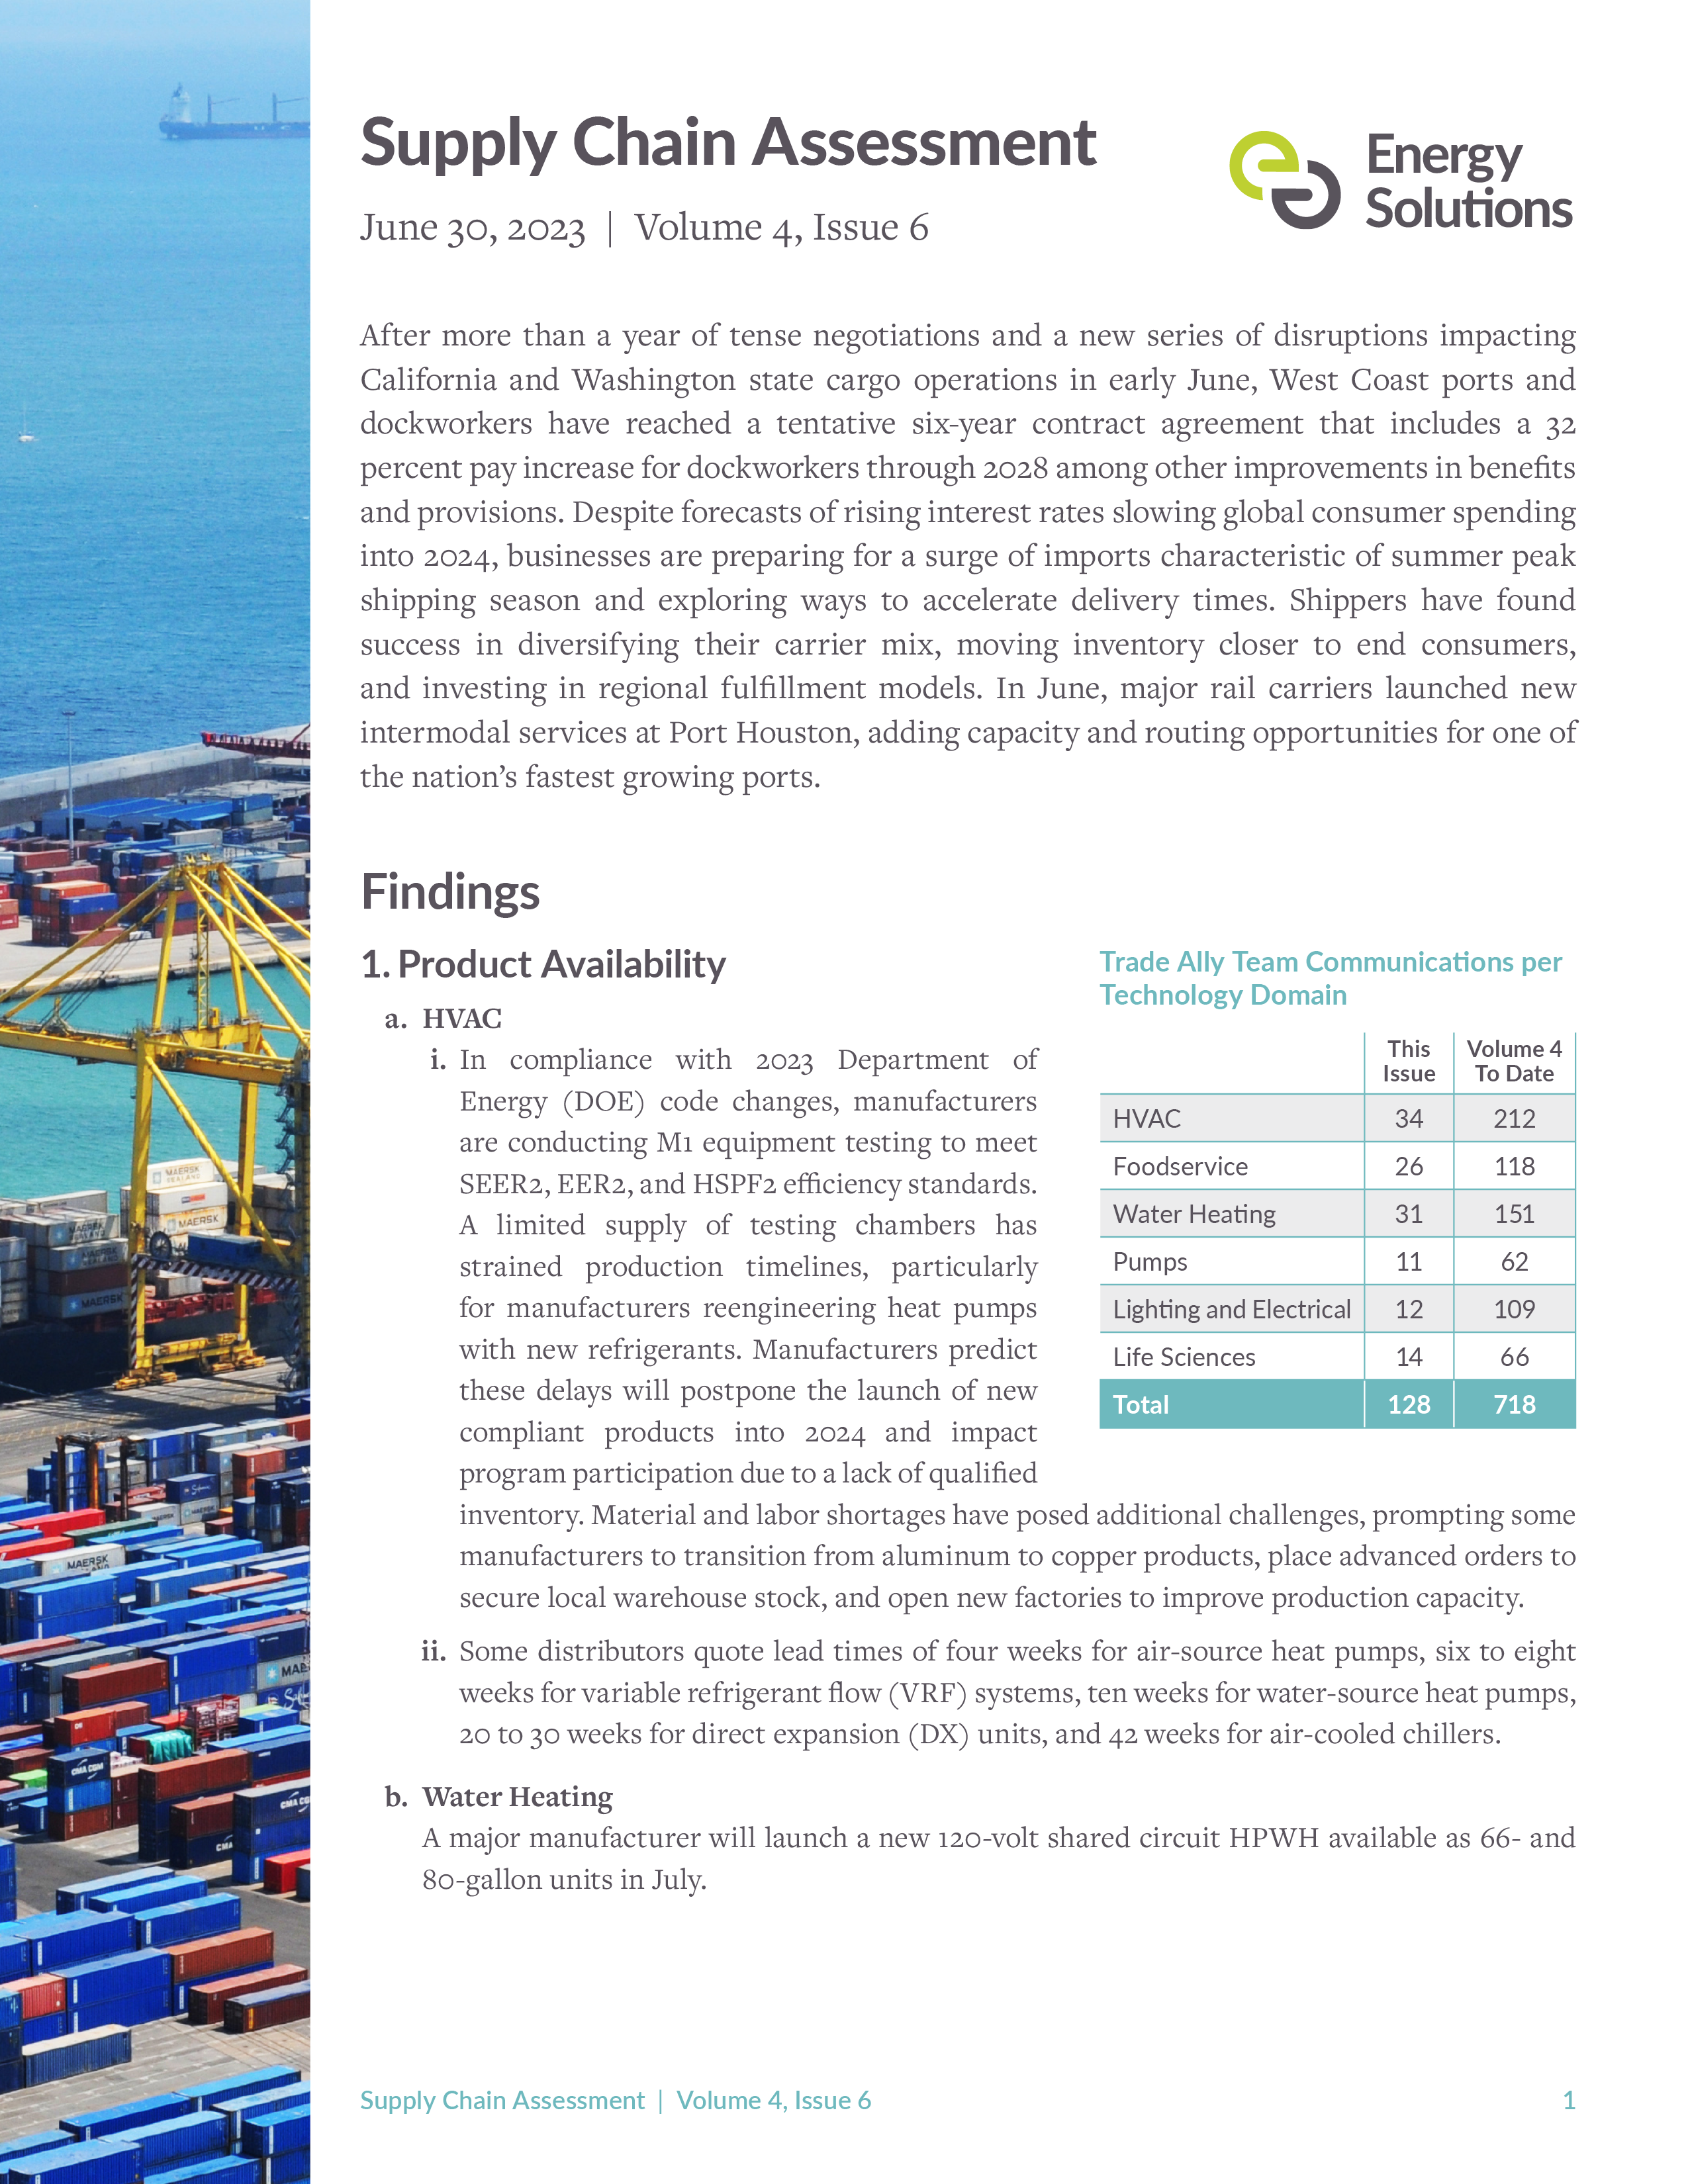 Supply Chain Assessment Volume 4 Issue 6